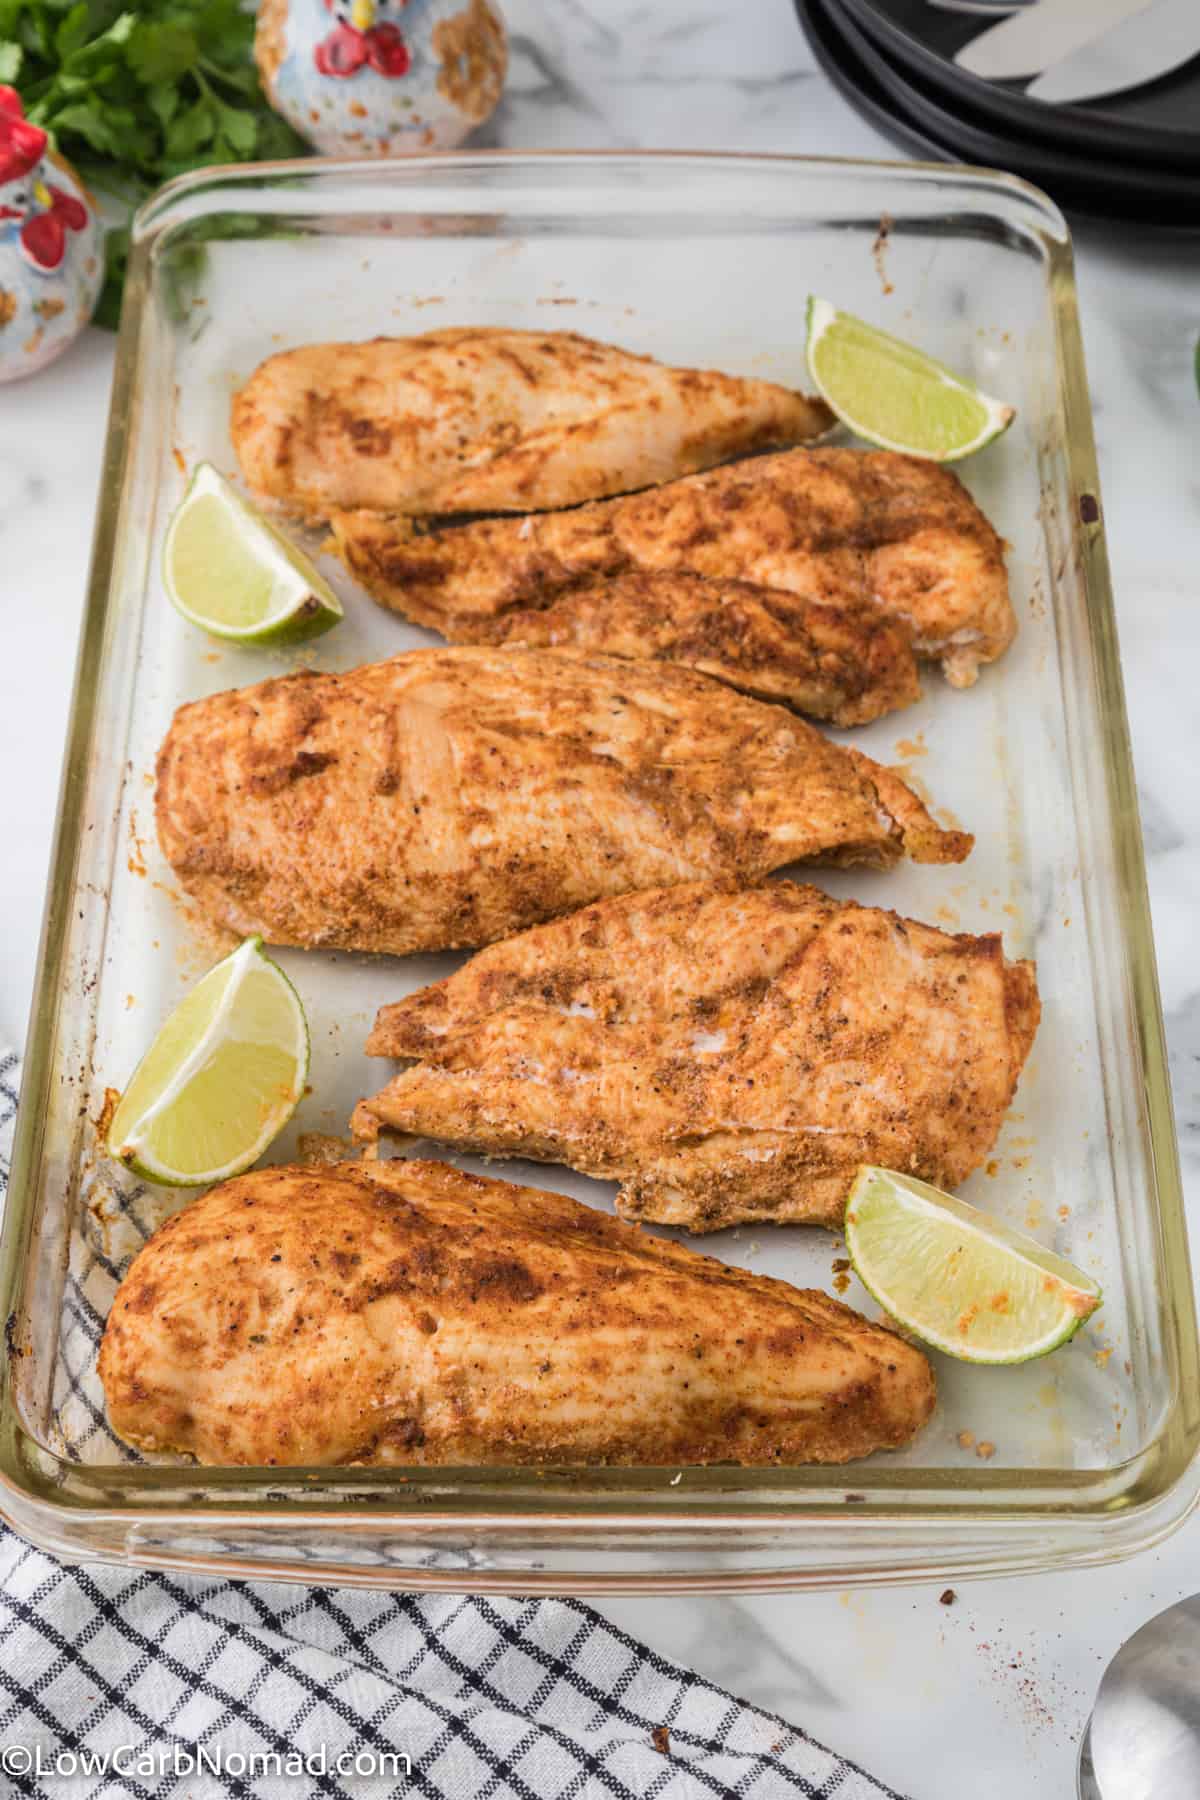 Baked Chili Lime Chicken Recipe